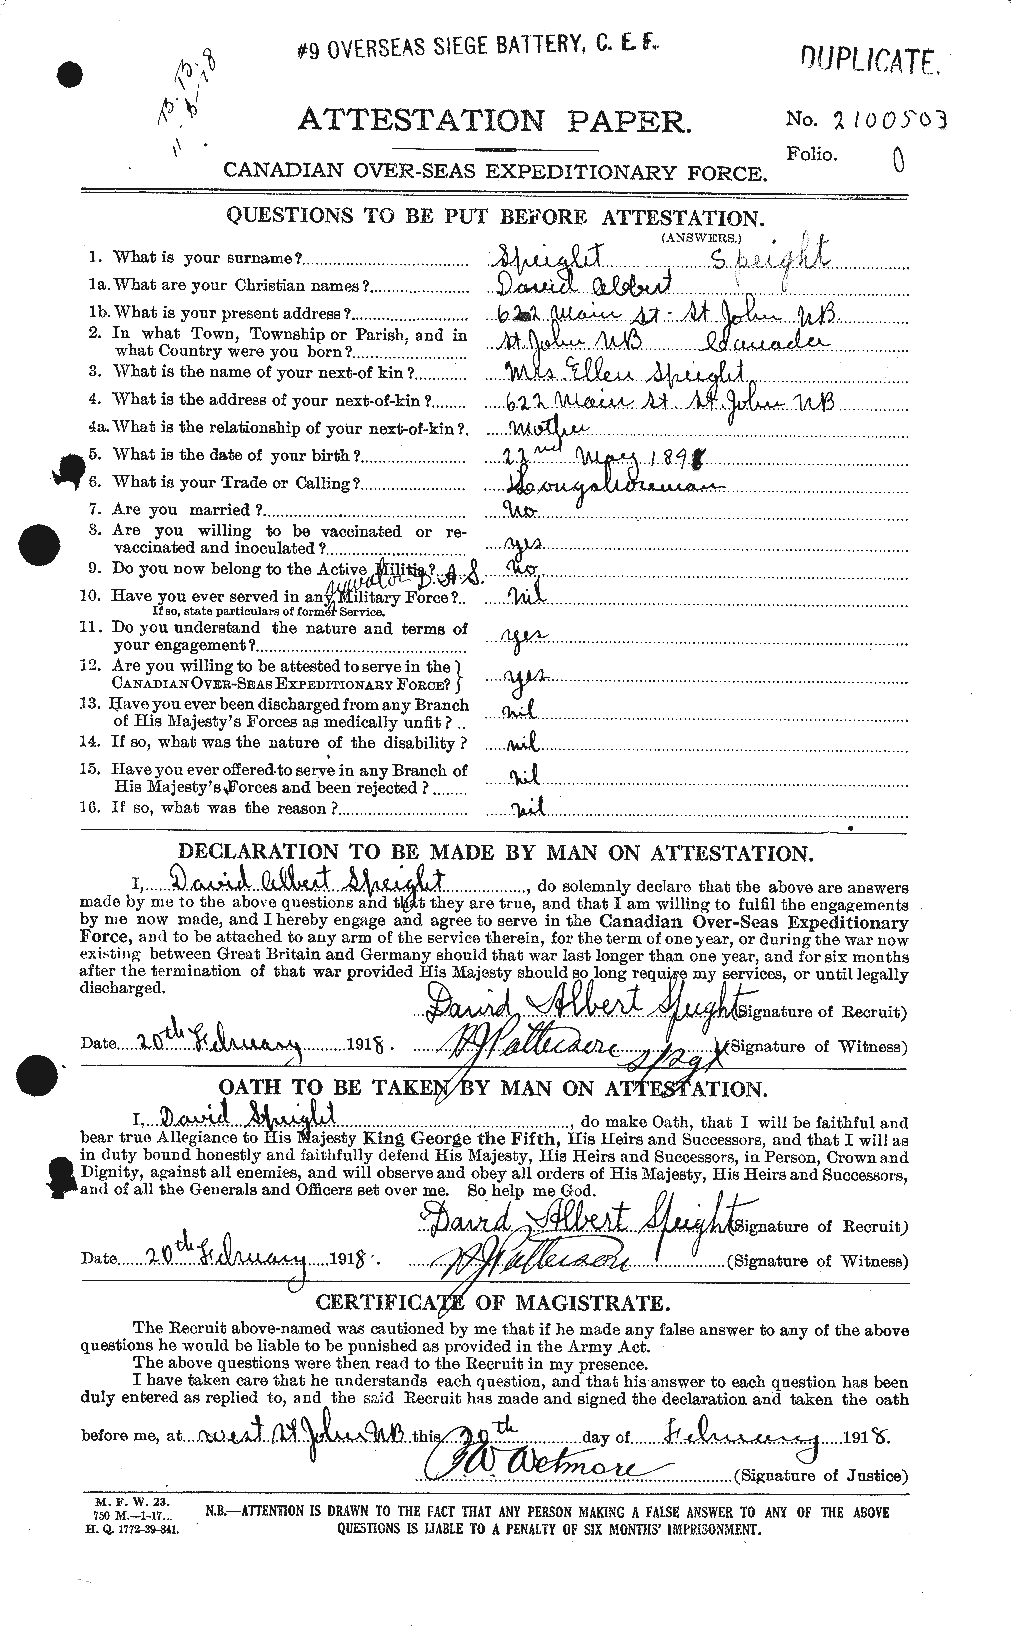 Personnel Records of the First World War - CEF 110078a